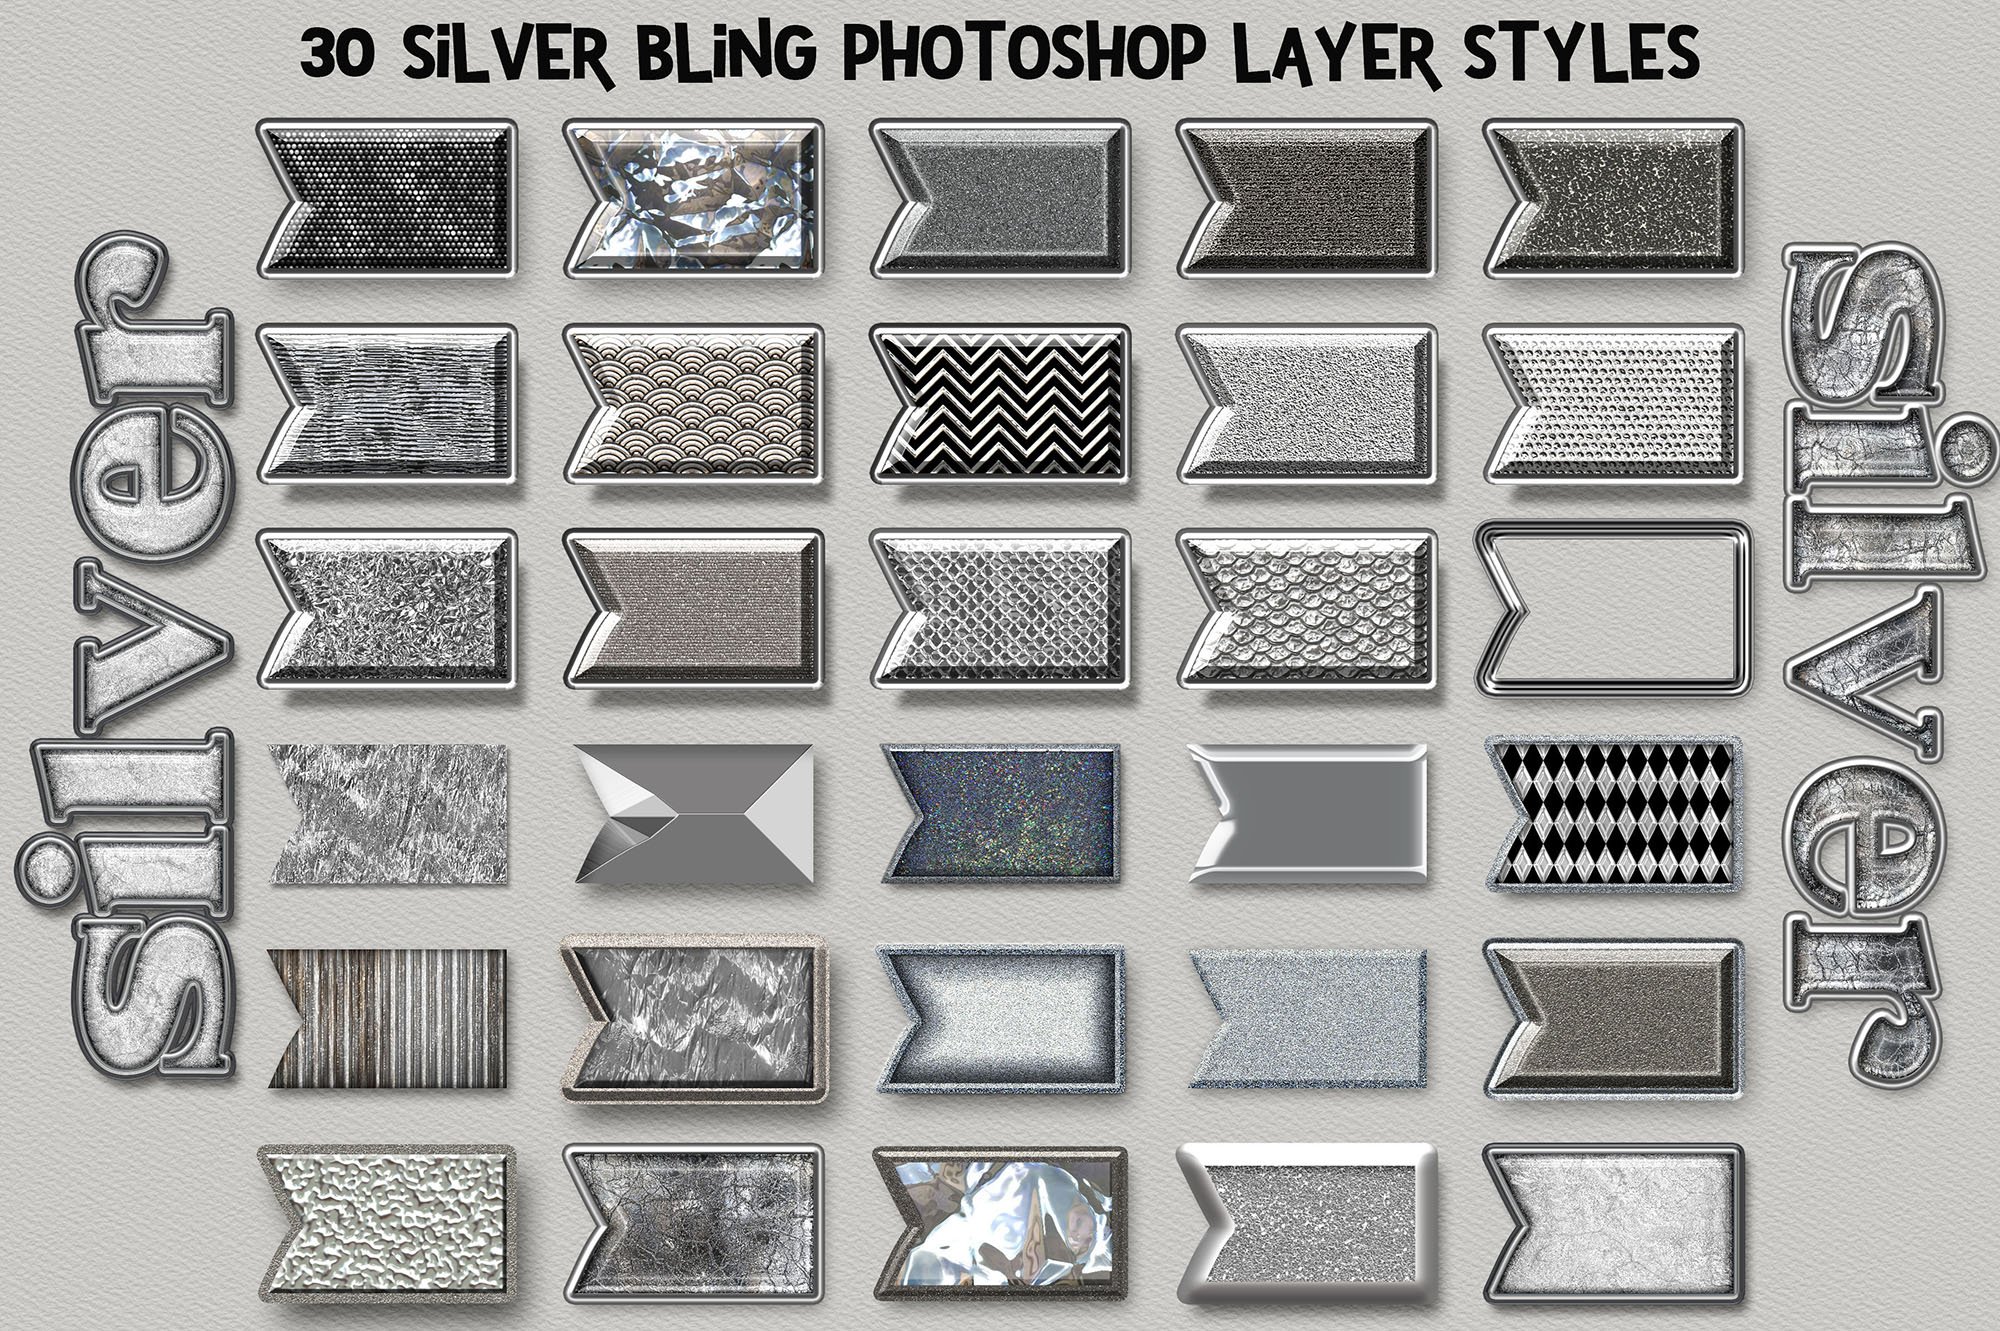 Silver Bling Photoshop Layer Stylespreview image.